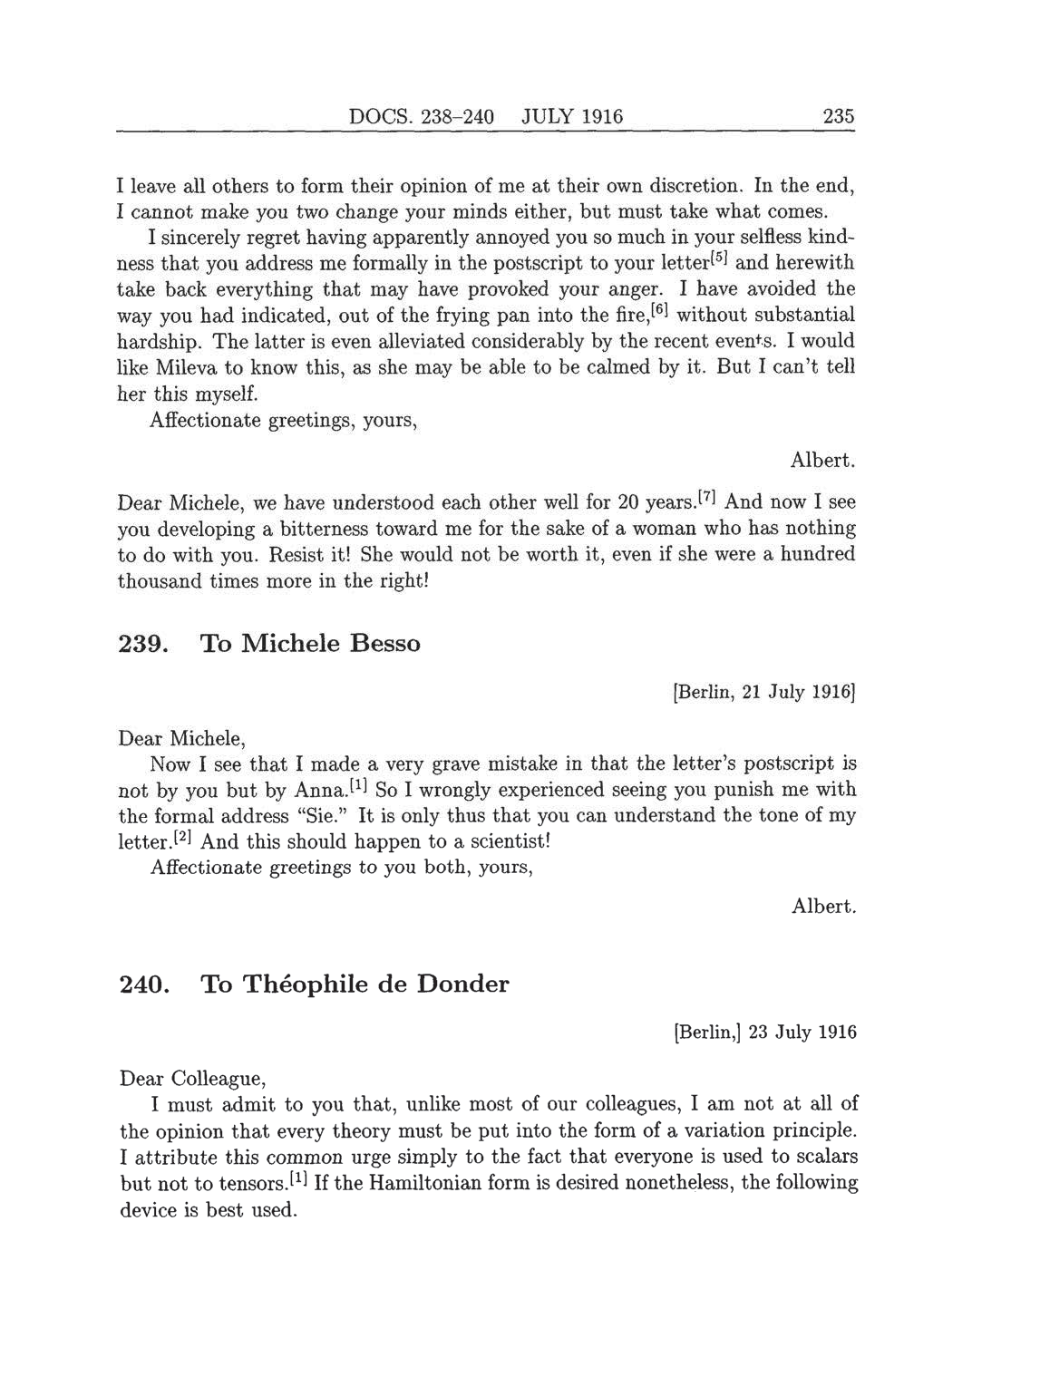 Volume 8: The Berlin Years: Correspondence, 1914-1918 (English translation supplement) page 235